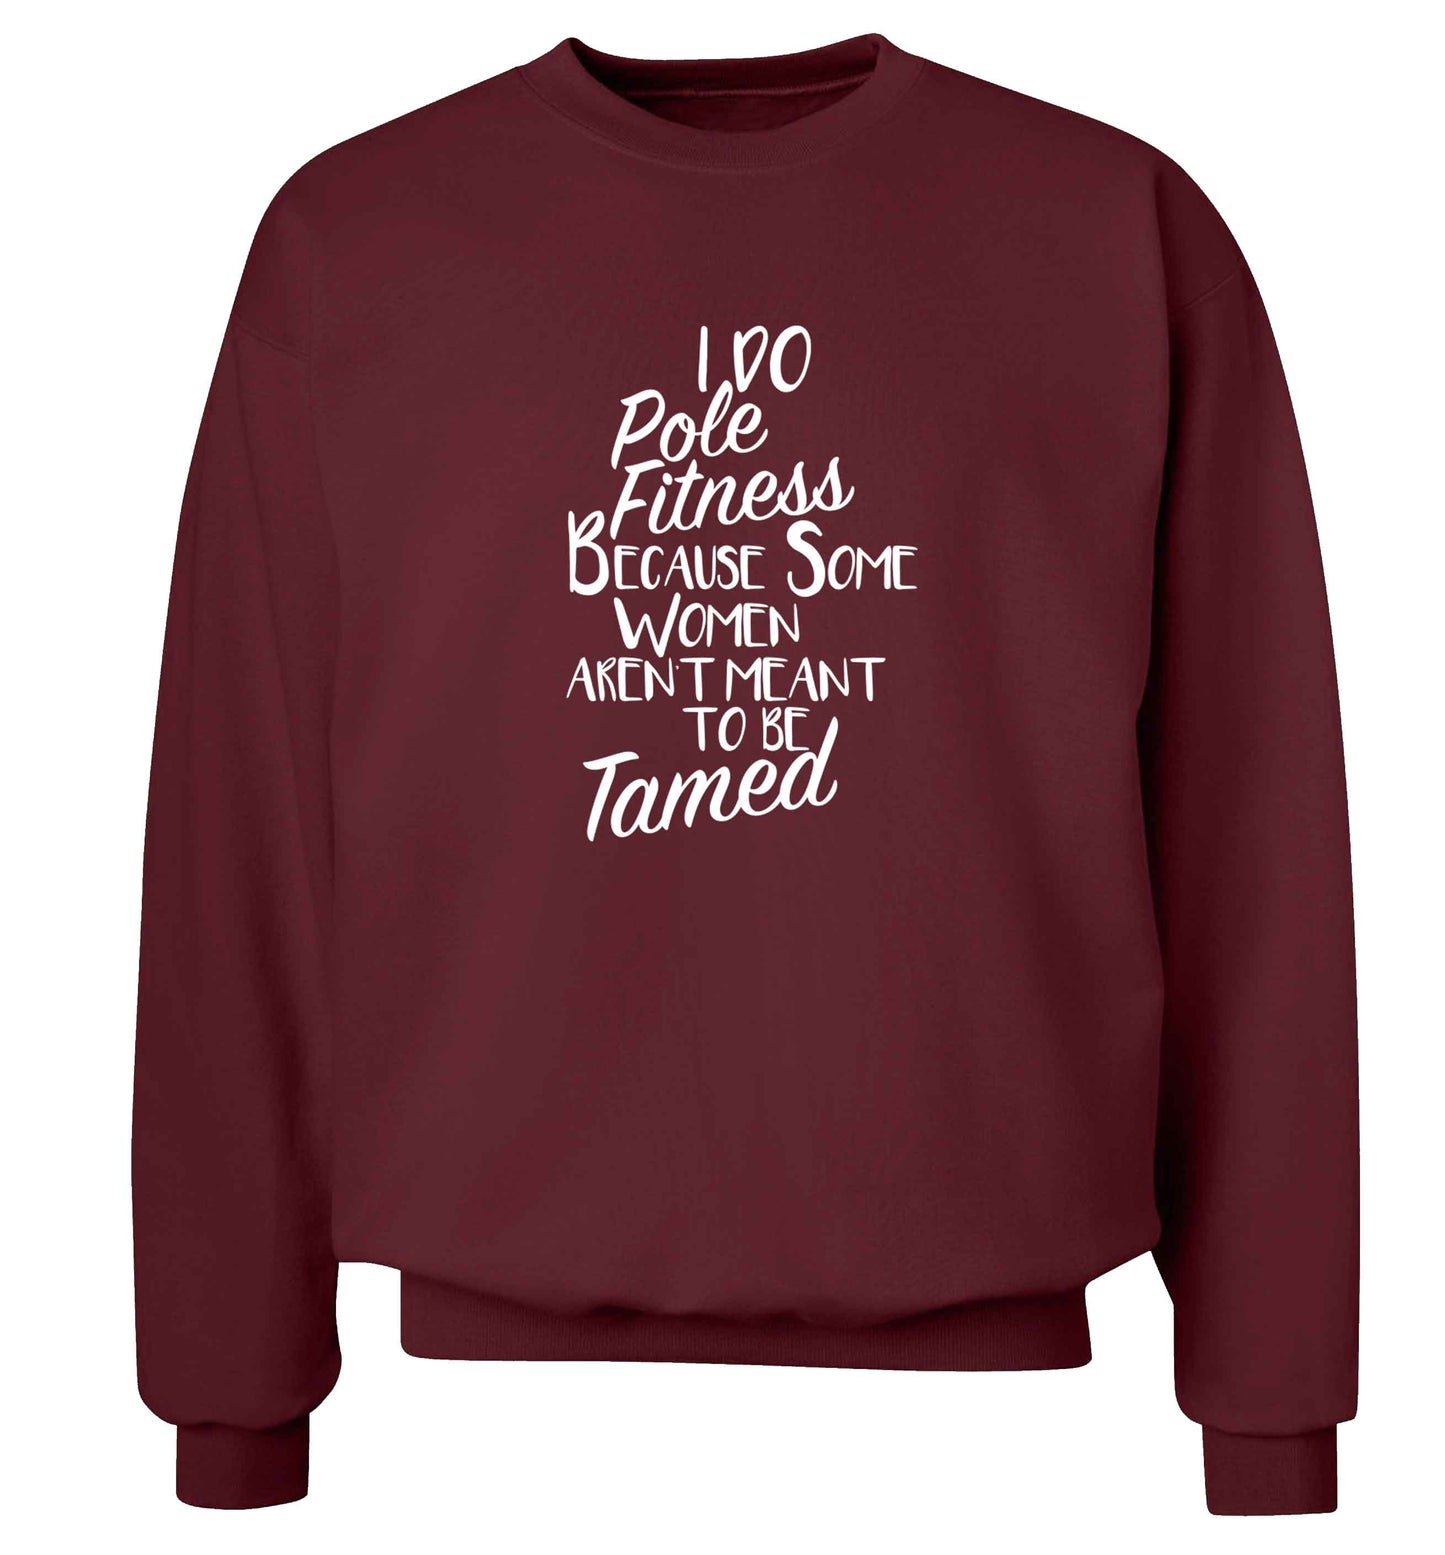 I do pole fitness because some women aren't meant to be tamed adult's unisex maroon sweater 2XL